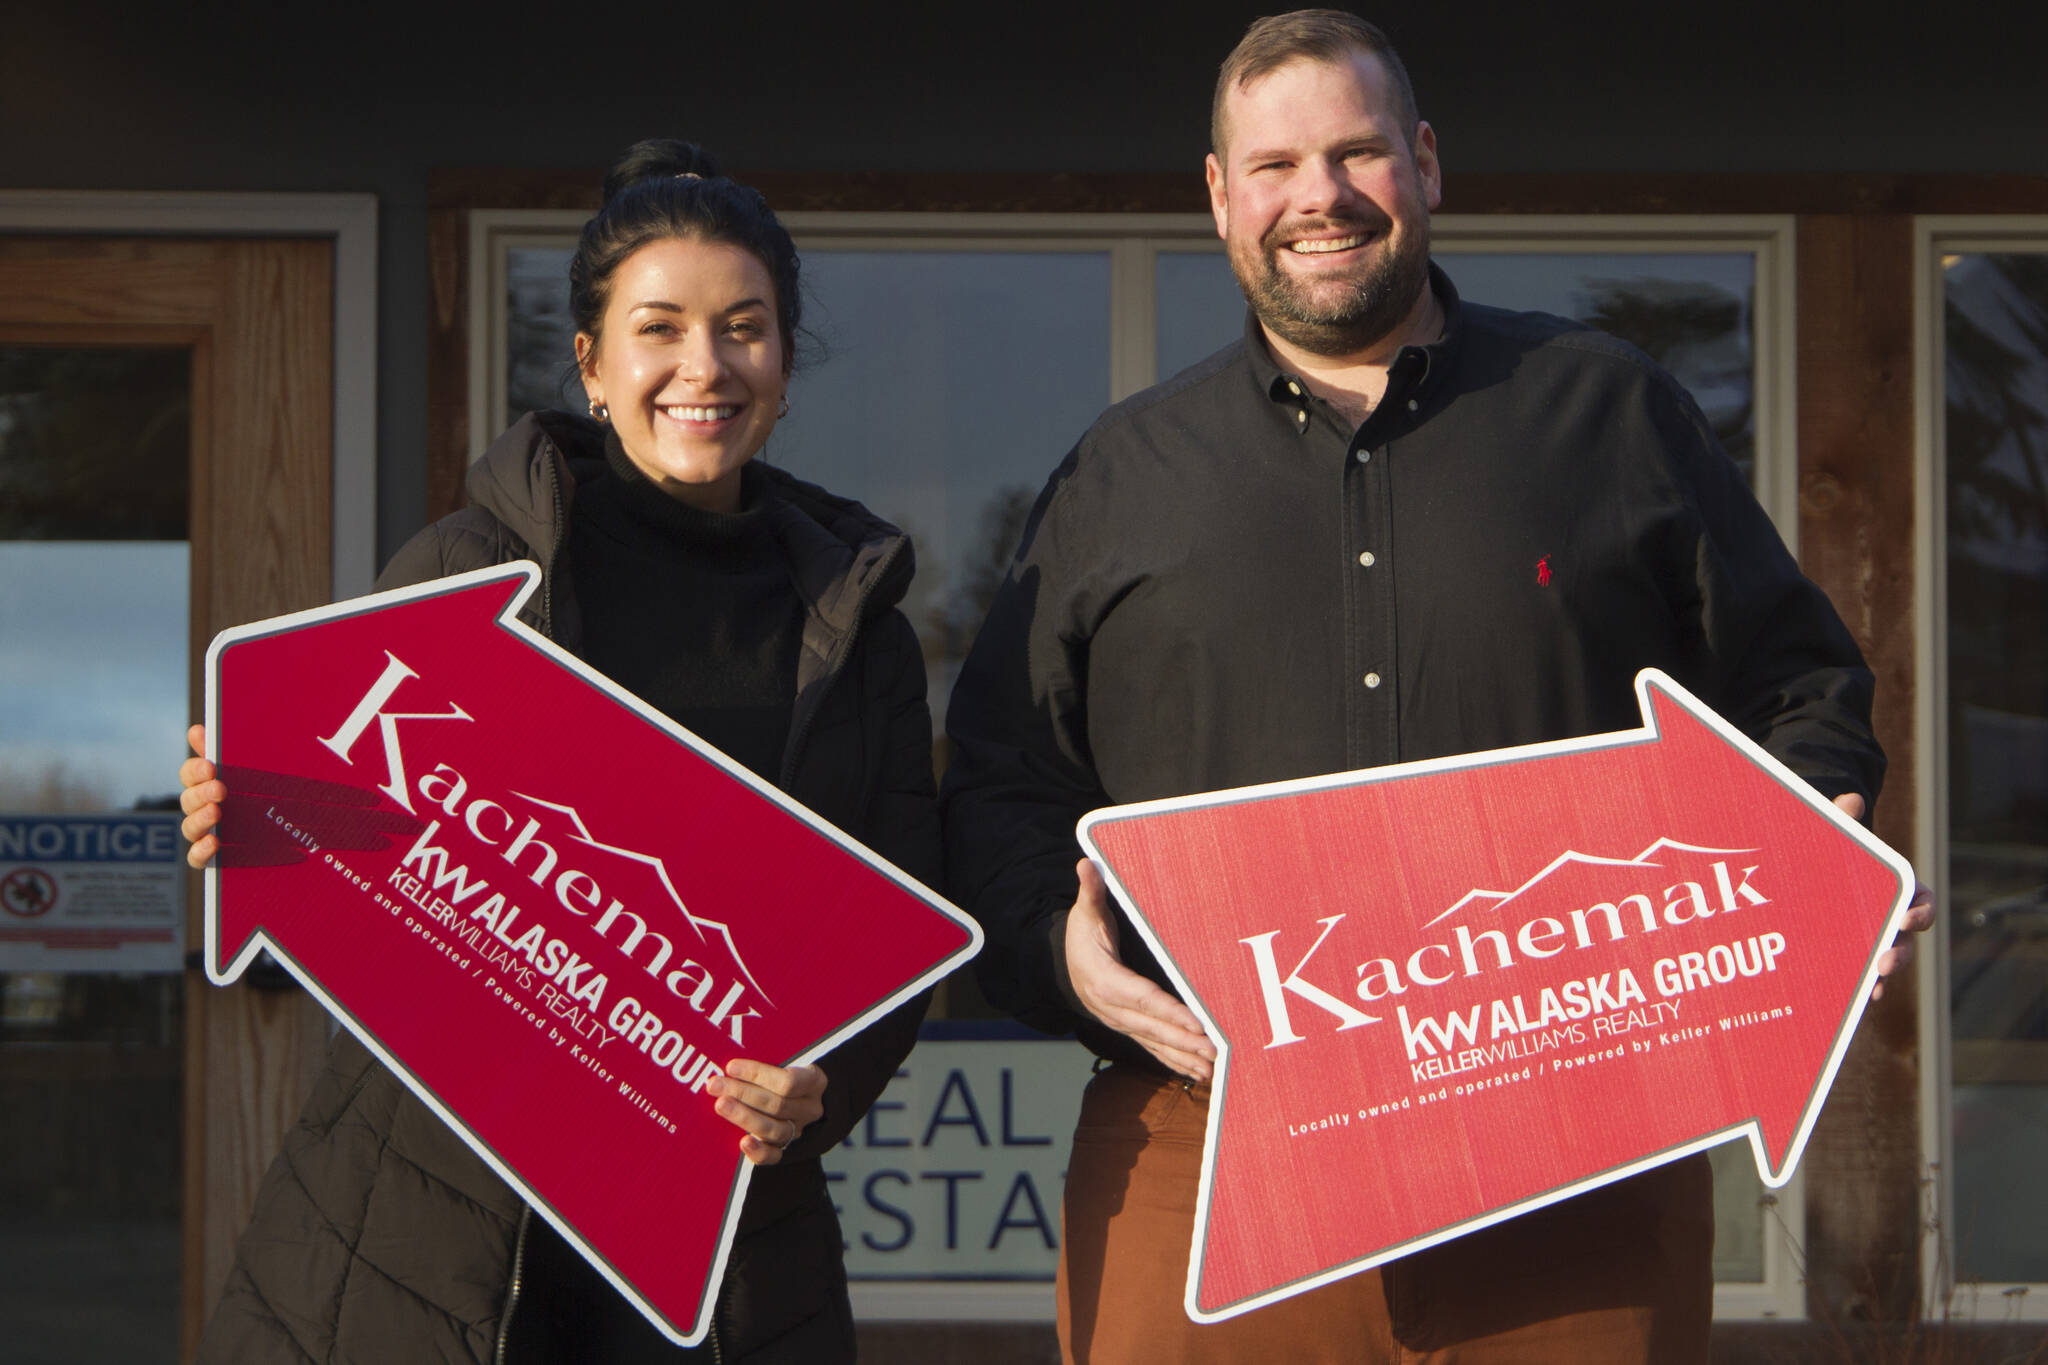 Valerie Buss, owner of Kachemak KW Alaska Group, and Joshua Nelson, CEO of Keller Williams Realty Alaska Group, are pictured at the new office location for Kachemak KW Alaska Group at 925 Sea Plane Court. (Photo by Sarah Knapp/Homer News)